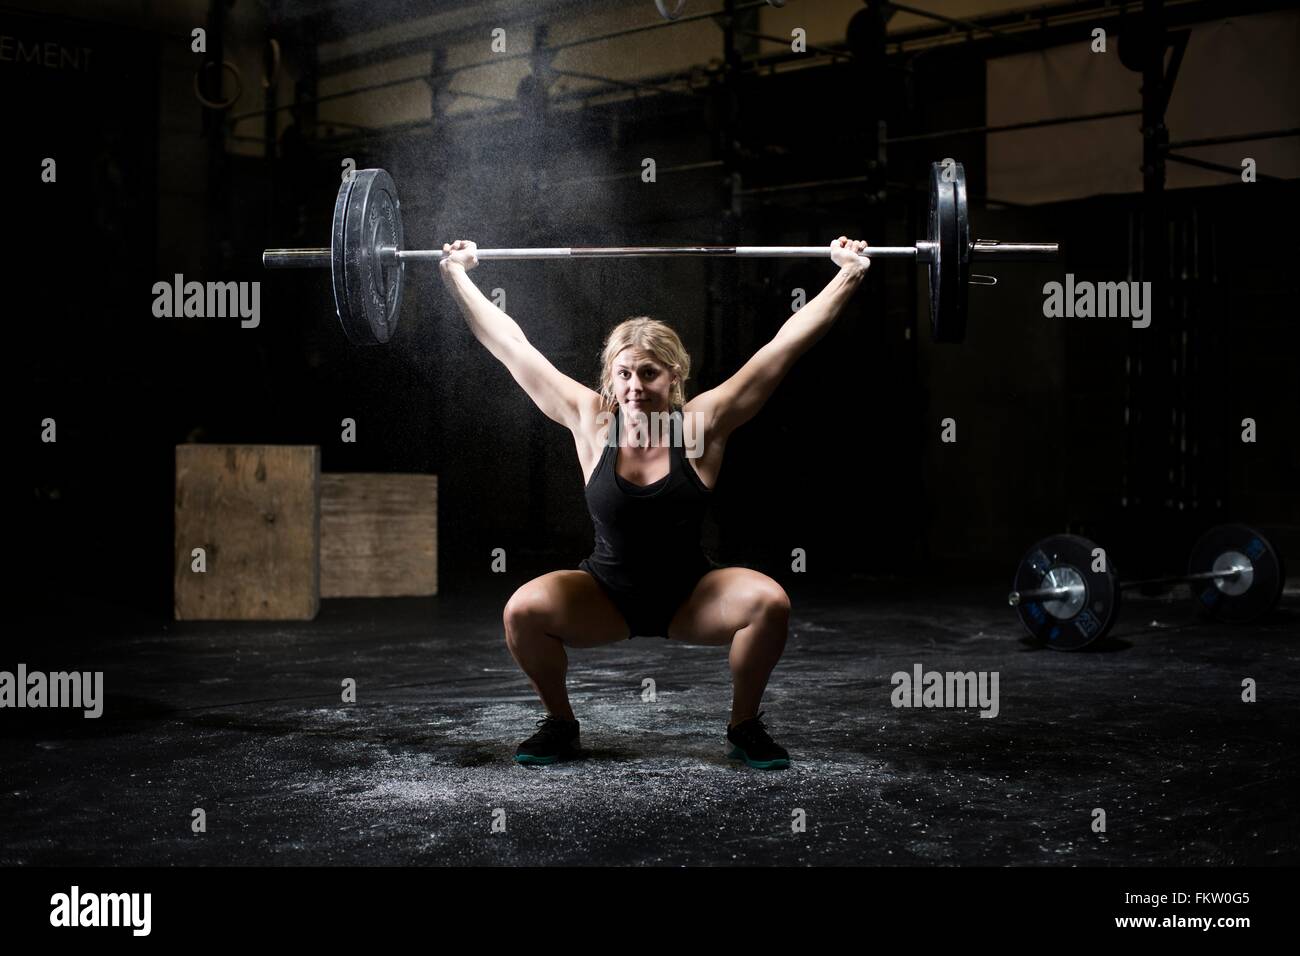 Young woman weightlifting barbell in dark gym Stock Photo